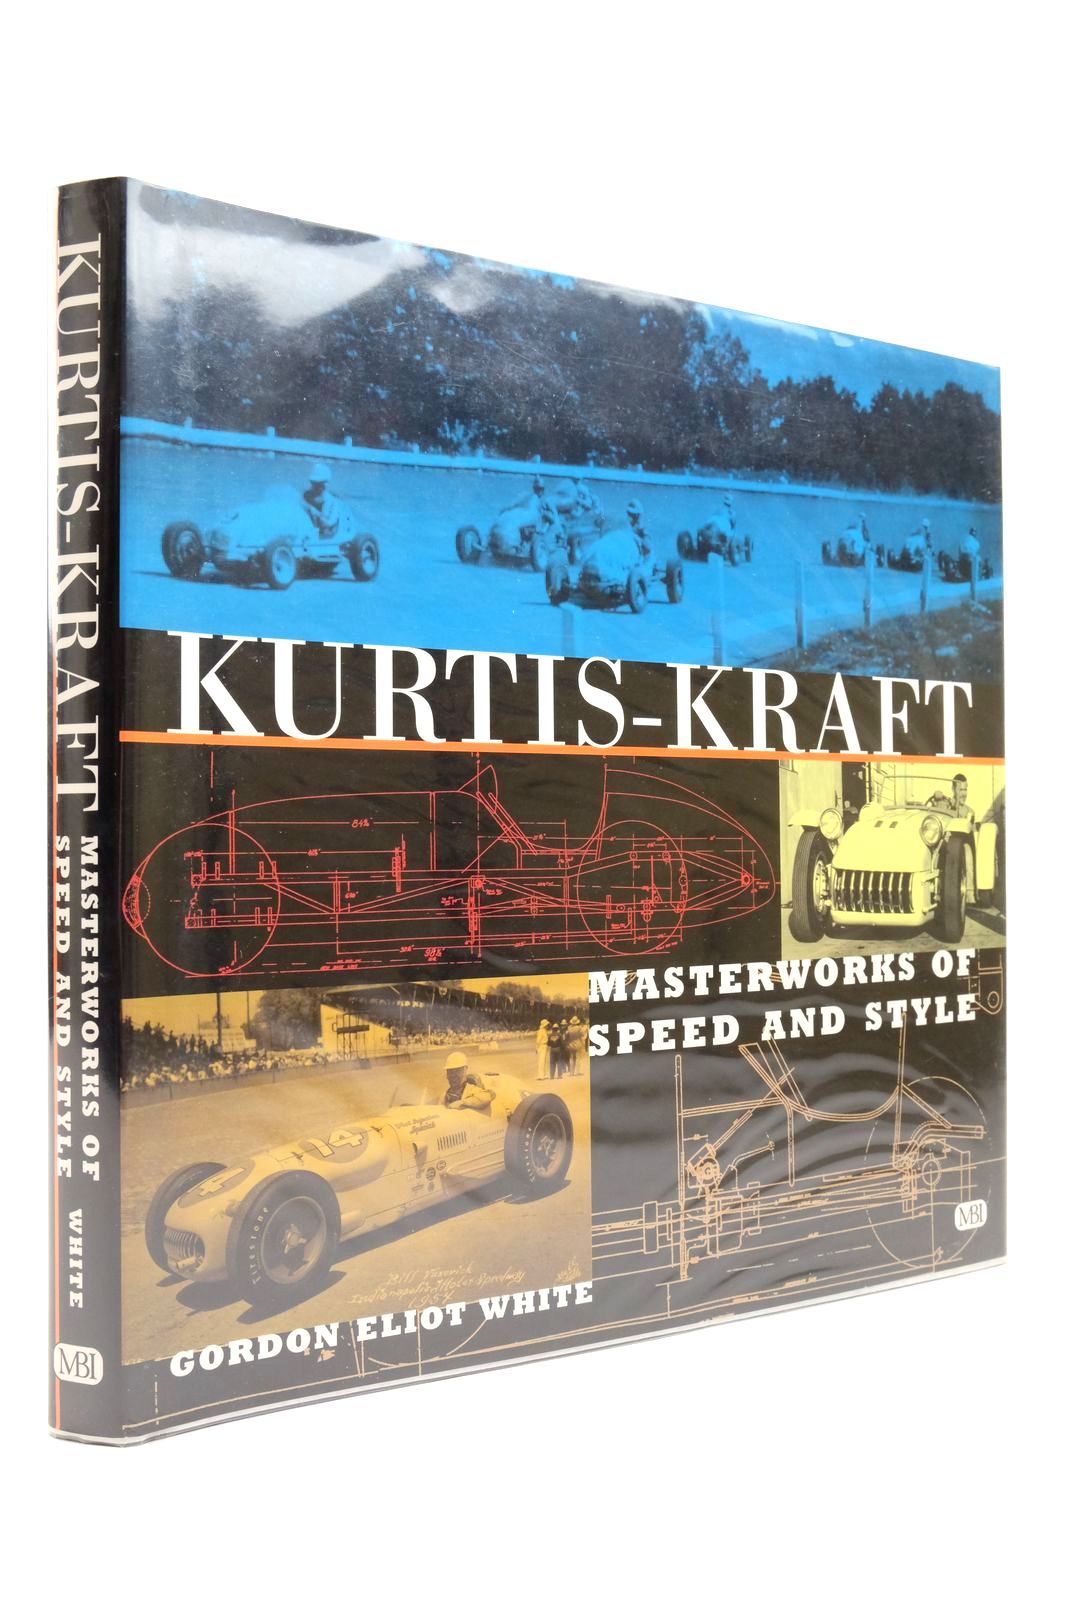 Photo of KURTIS-KRAFT MASTERWORKS OF SPEED AND STYLE written by White, Gordon Eliot published by MBI Publishing (STOCK CODE: 2138640)  for sale by Stella & Rose's Books